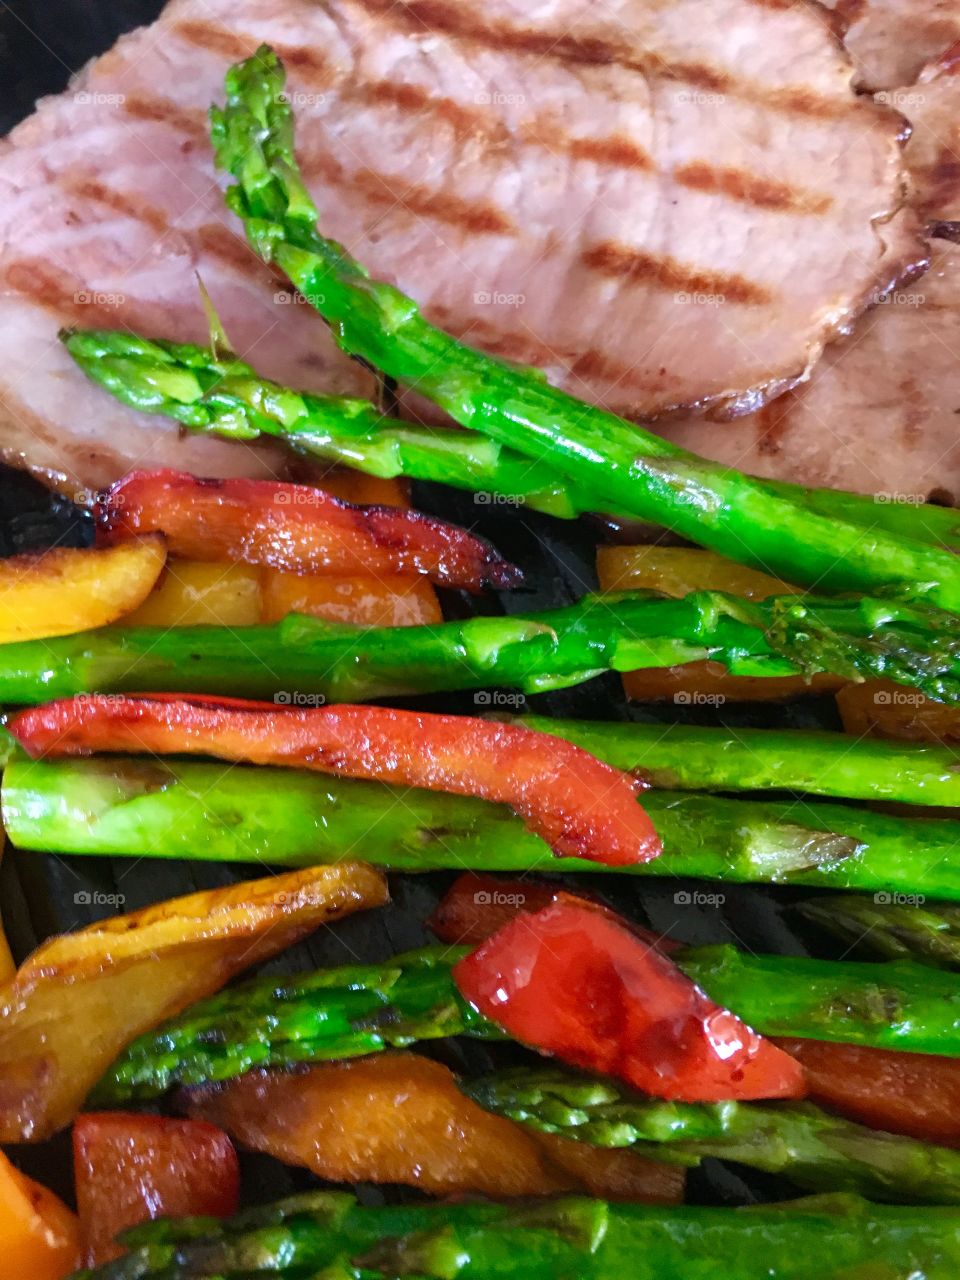 Asparagus and bell pepper with meat